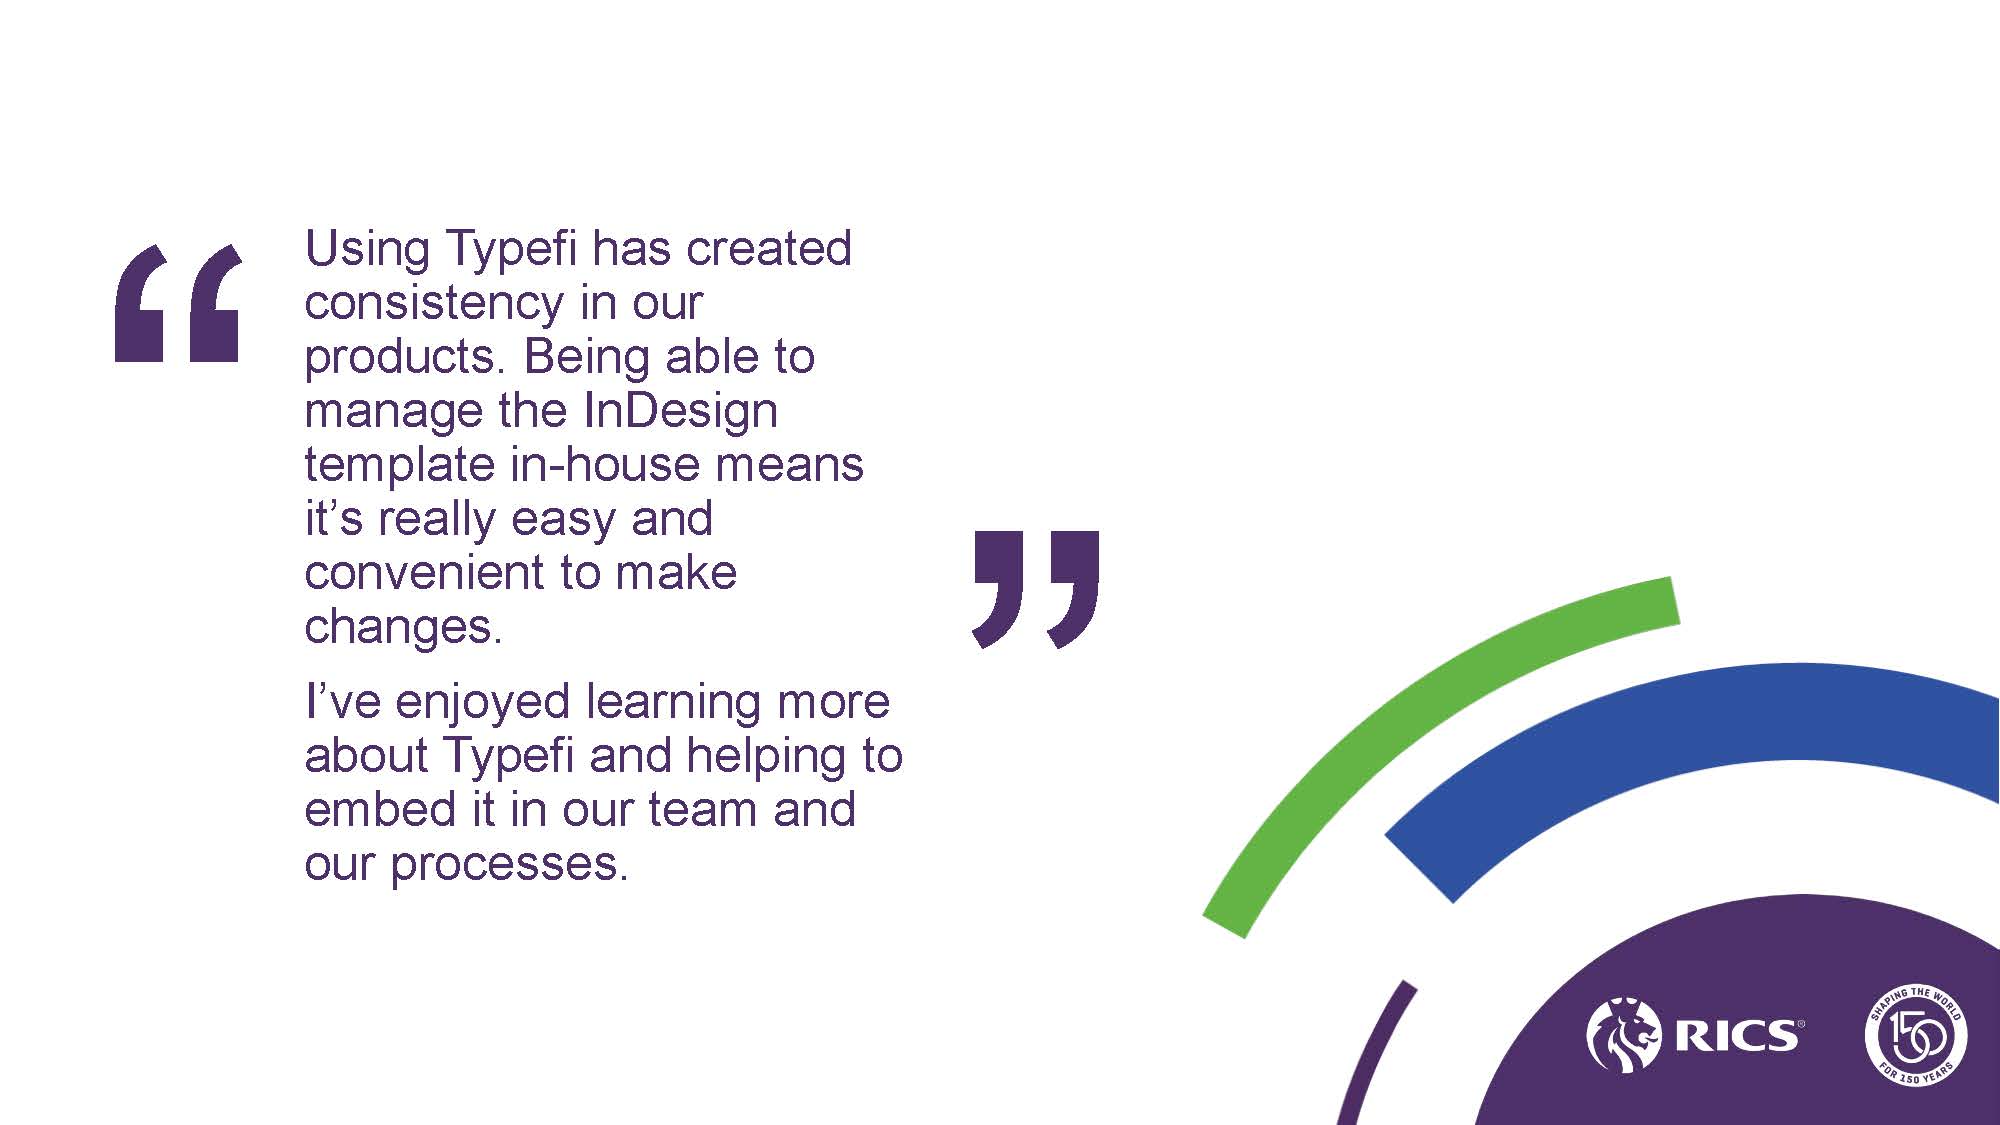 Slide with a quote from a RICS team member: “Using Typefi has created consistency in our products. Being able to manage the InDesign template in-house means it’s really easy and convenient to make changes. I’ve enjoyed learning more about Typefi and helping to embed it in our team and our processes.”